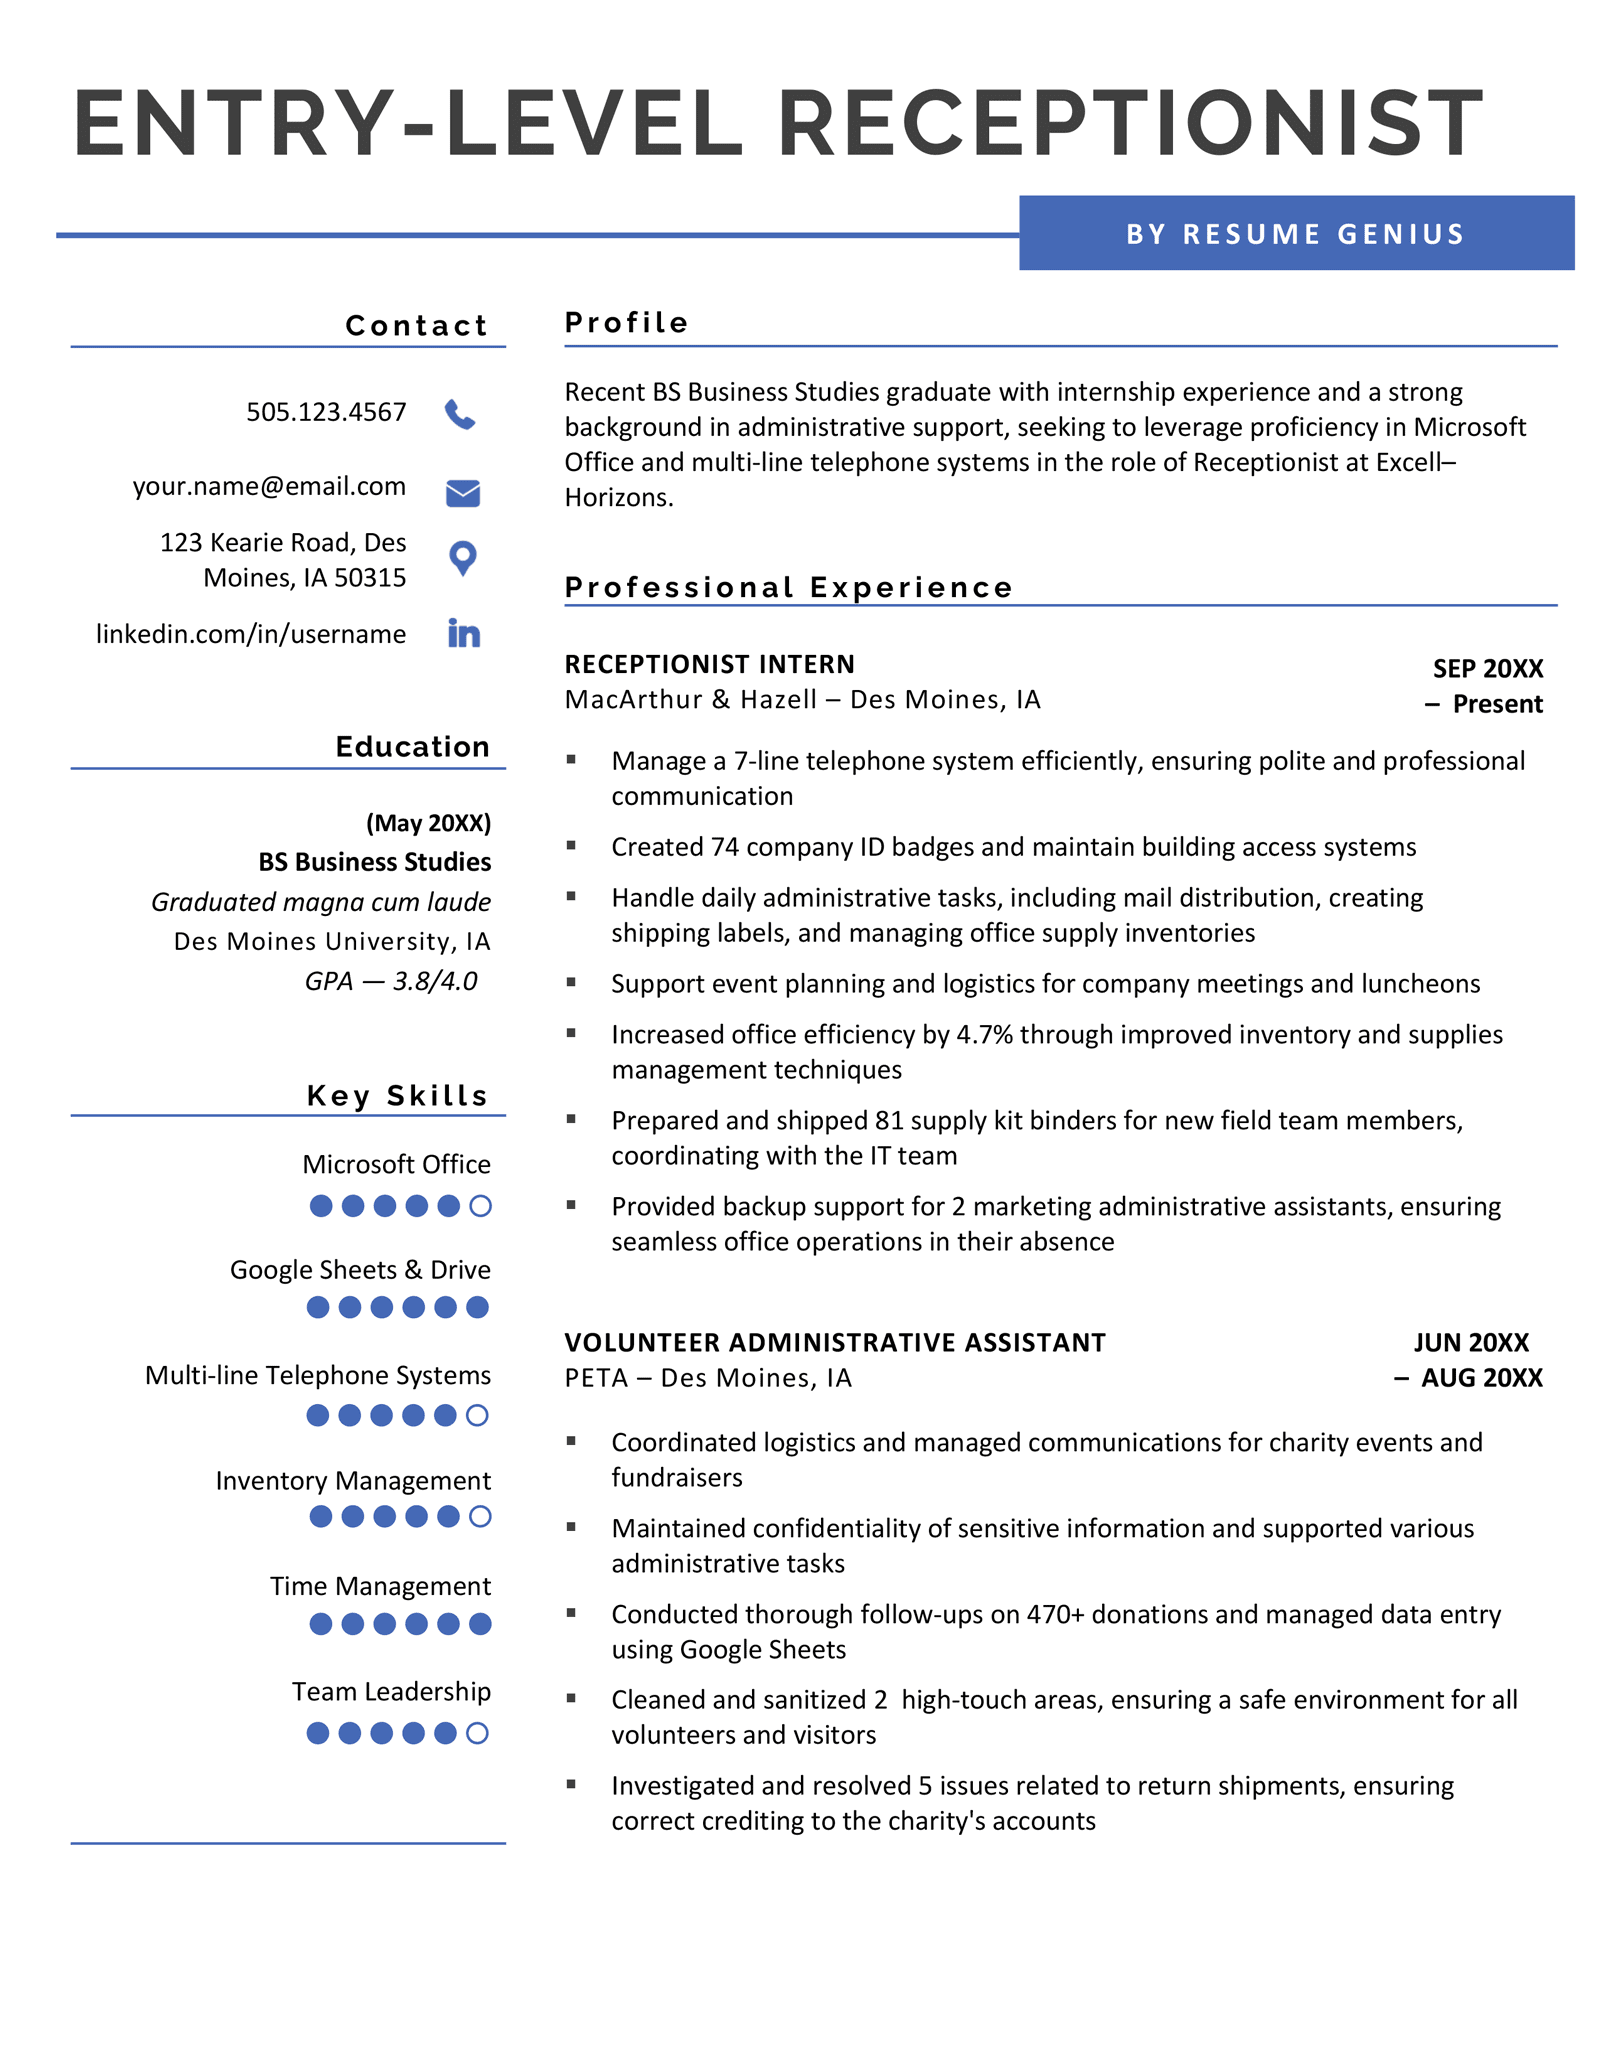 An entry-level receptionist resume that uses a blue color scheme and a two-column layout to highlight the candidate's CV sections.